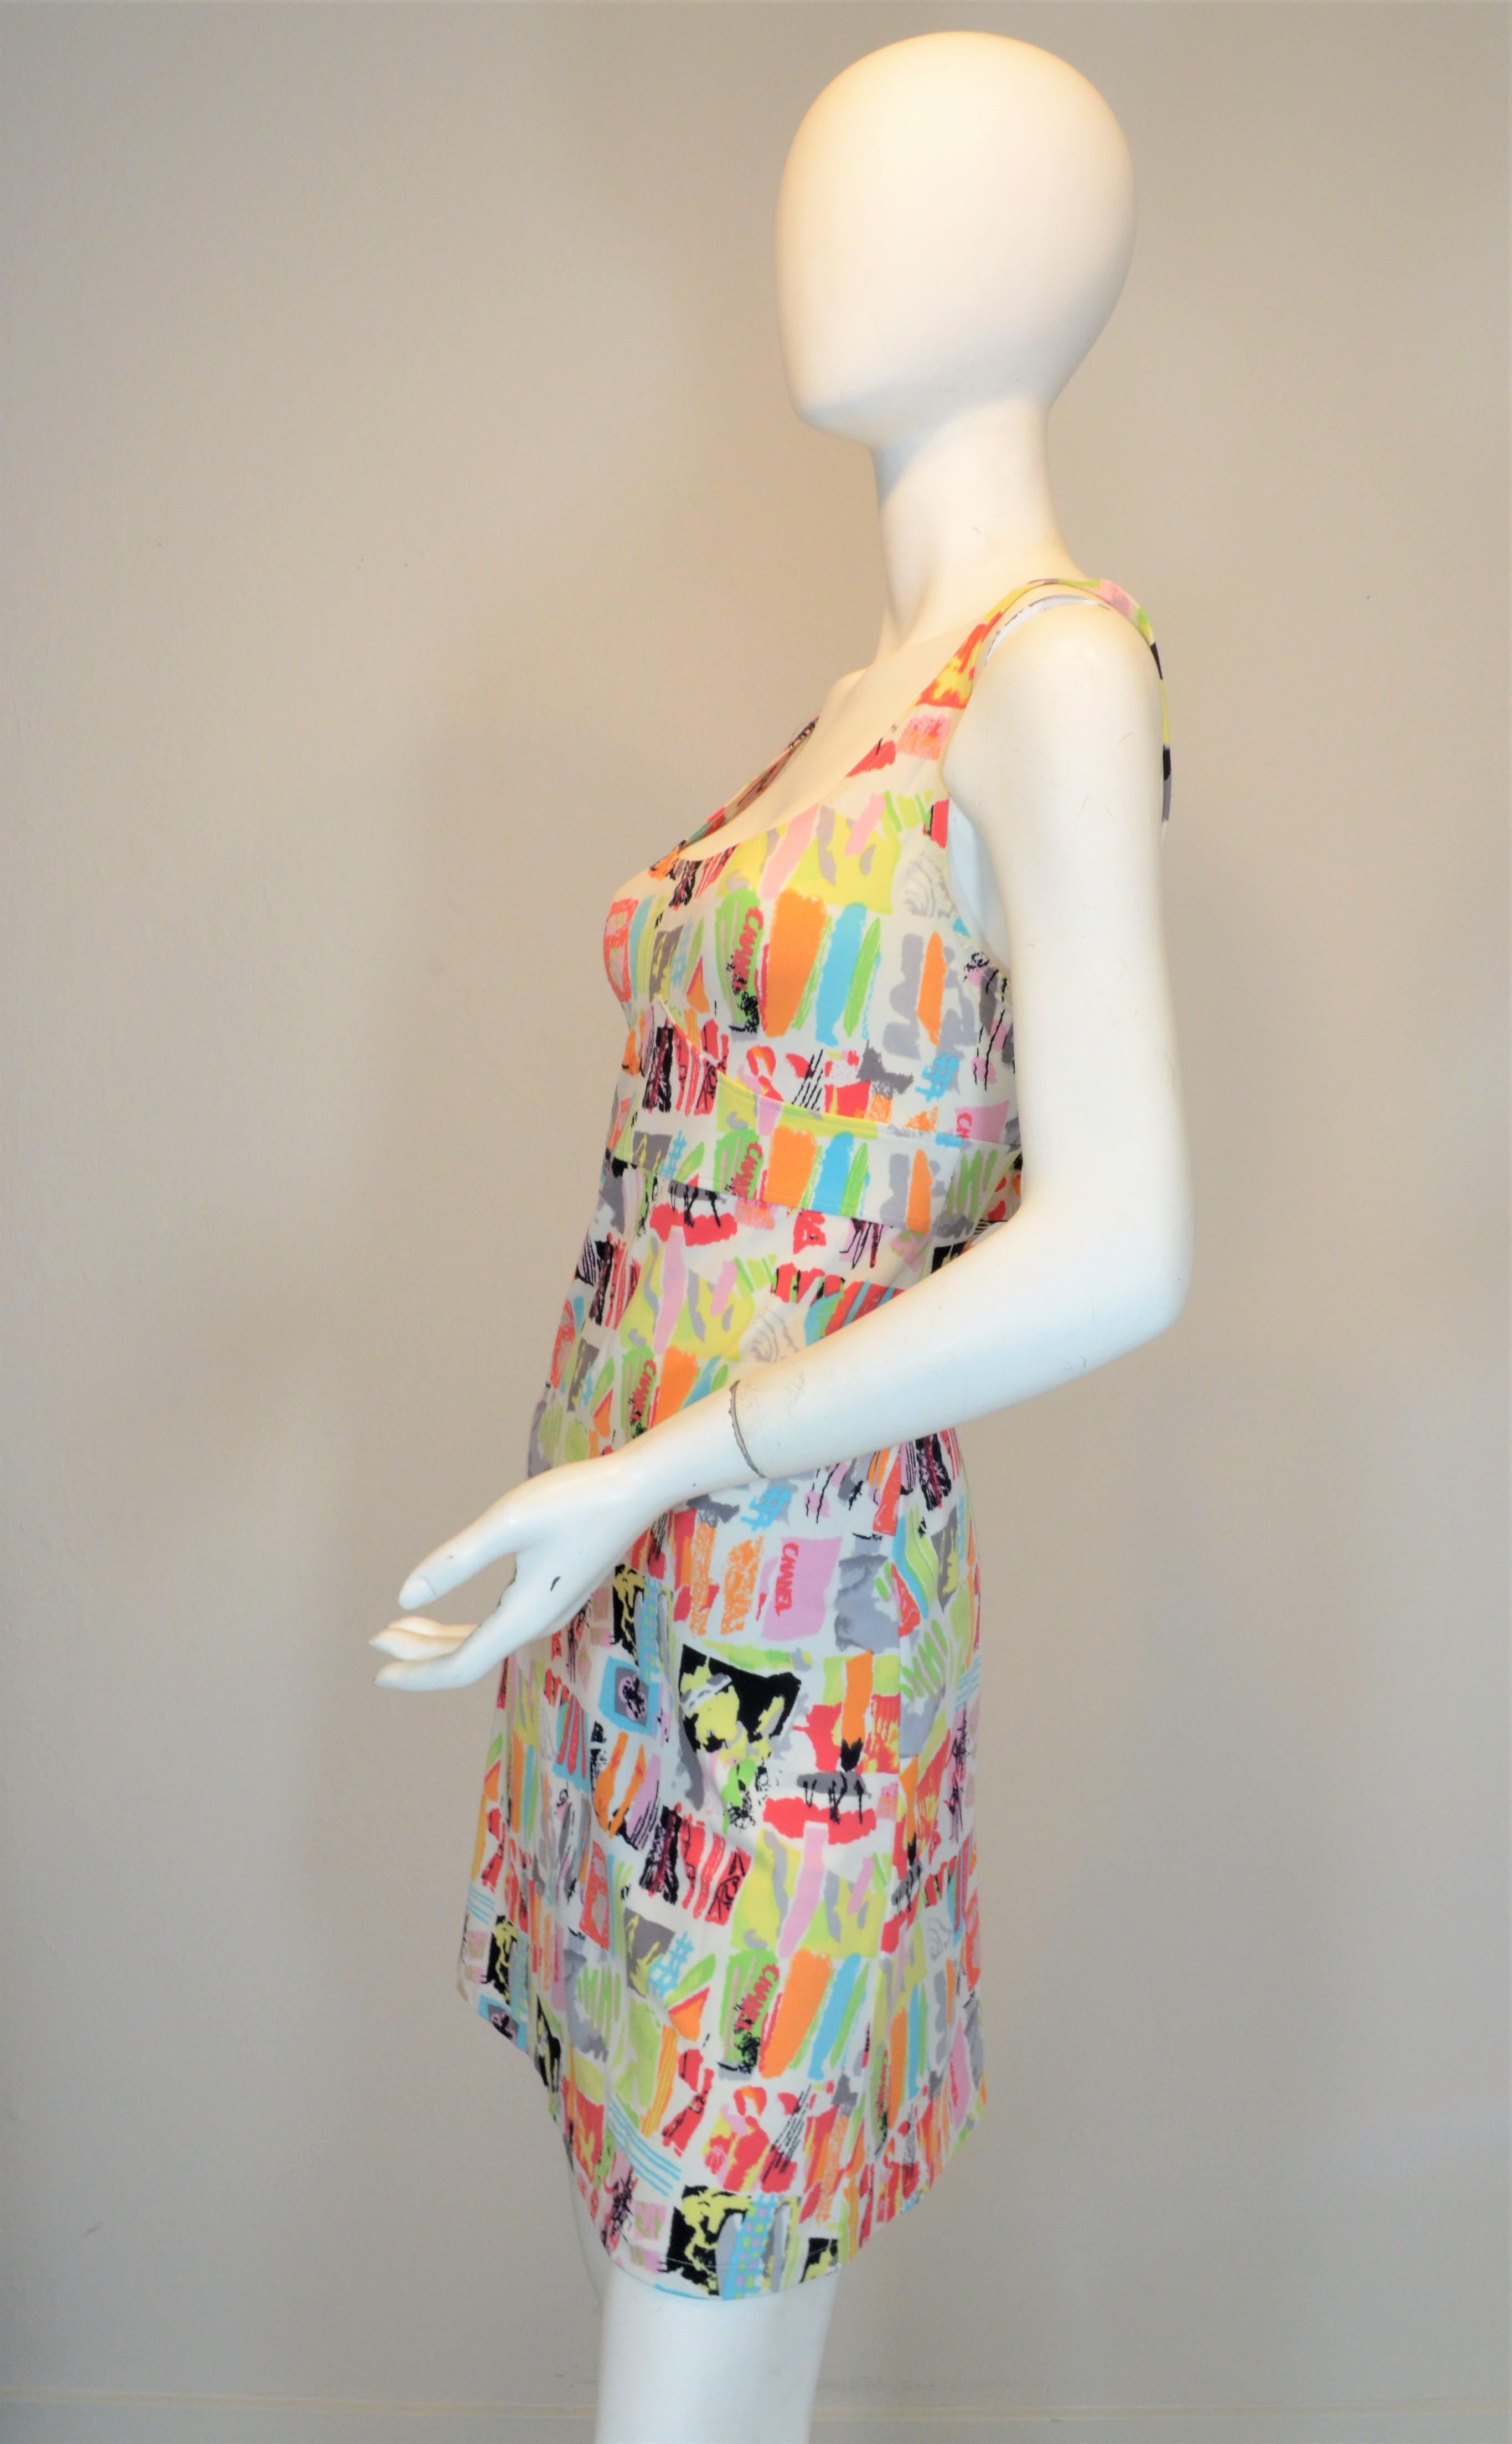 Chanel 1990's print dress features a multicolor graffiti print on a stretchy jersey fabric. Dress has a defined bust area and an open back. Dress is in good vintage condition with normal wears due to age.

Measurements: 
Bust 34”, waist 30”, hips